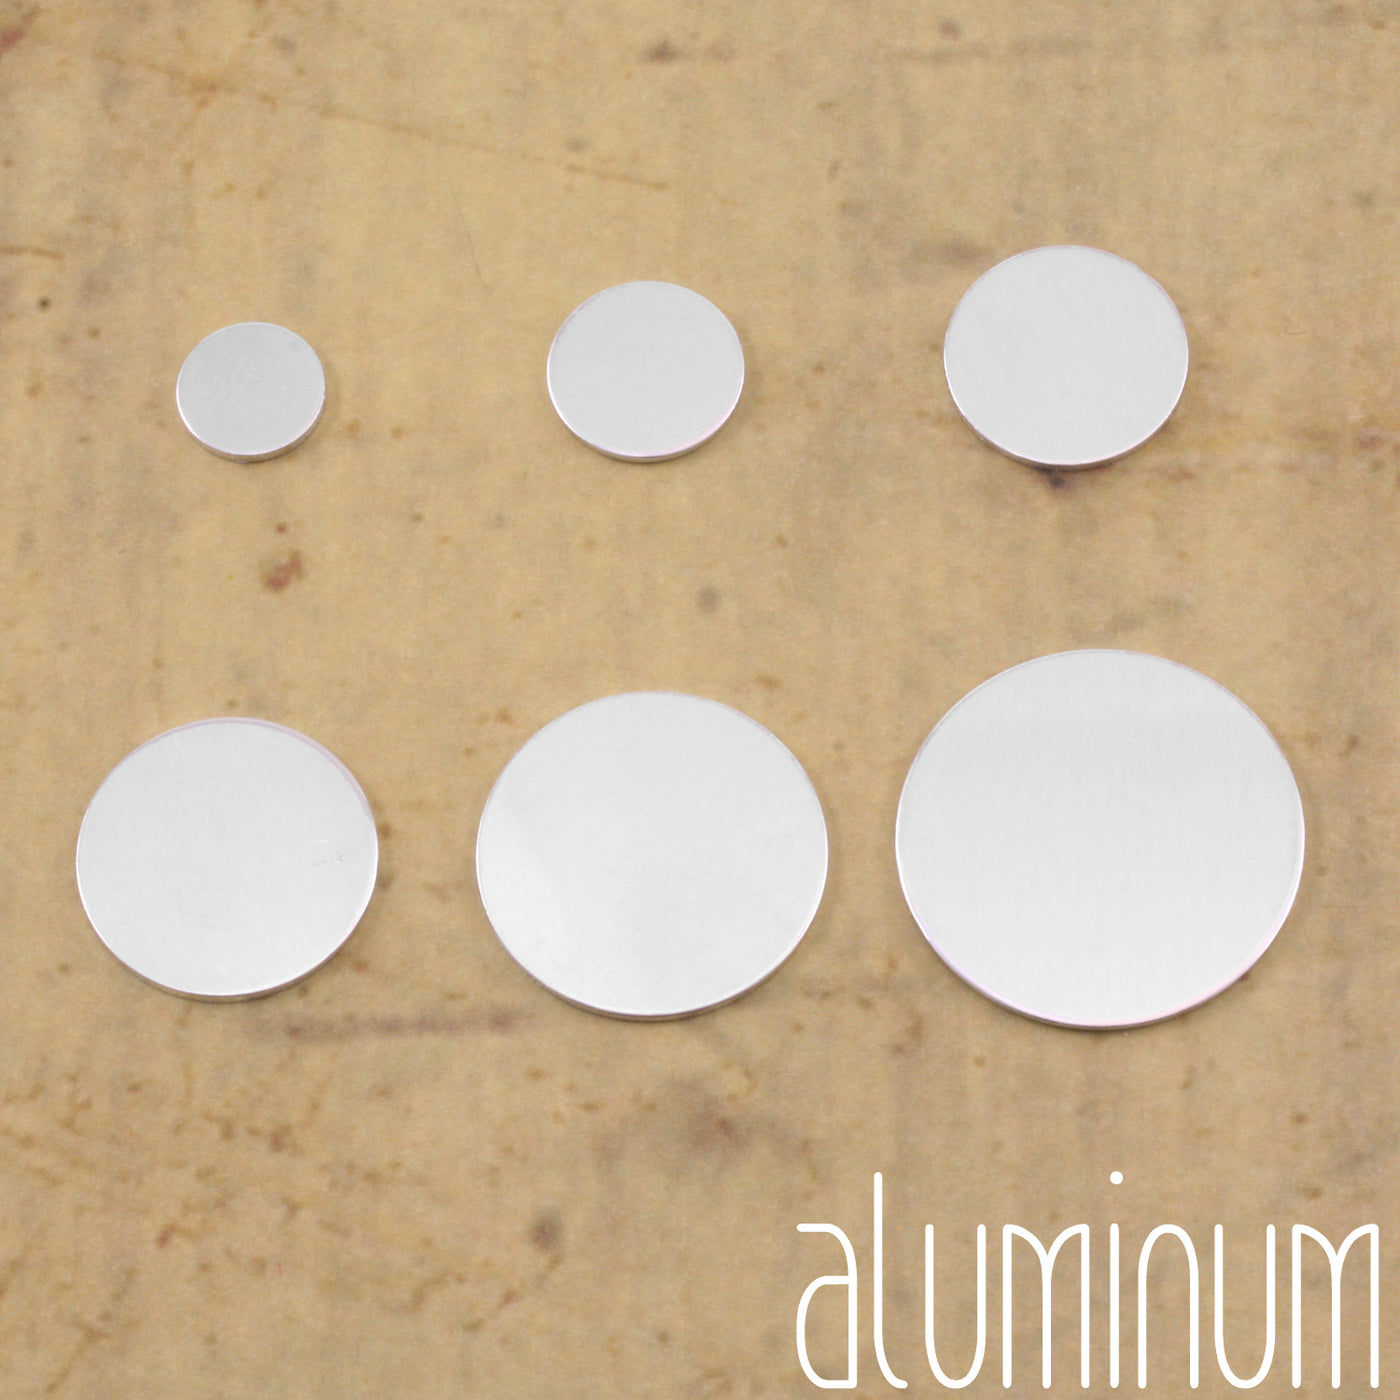 FIVE 7/8 Round Aluminum Stamping Blanks 16 Gauge Round Disc Stamping Blanks  Jewelry Making Supplies 